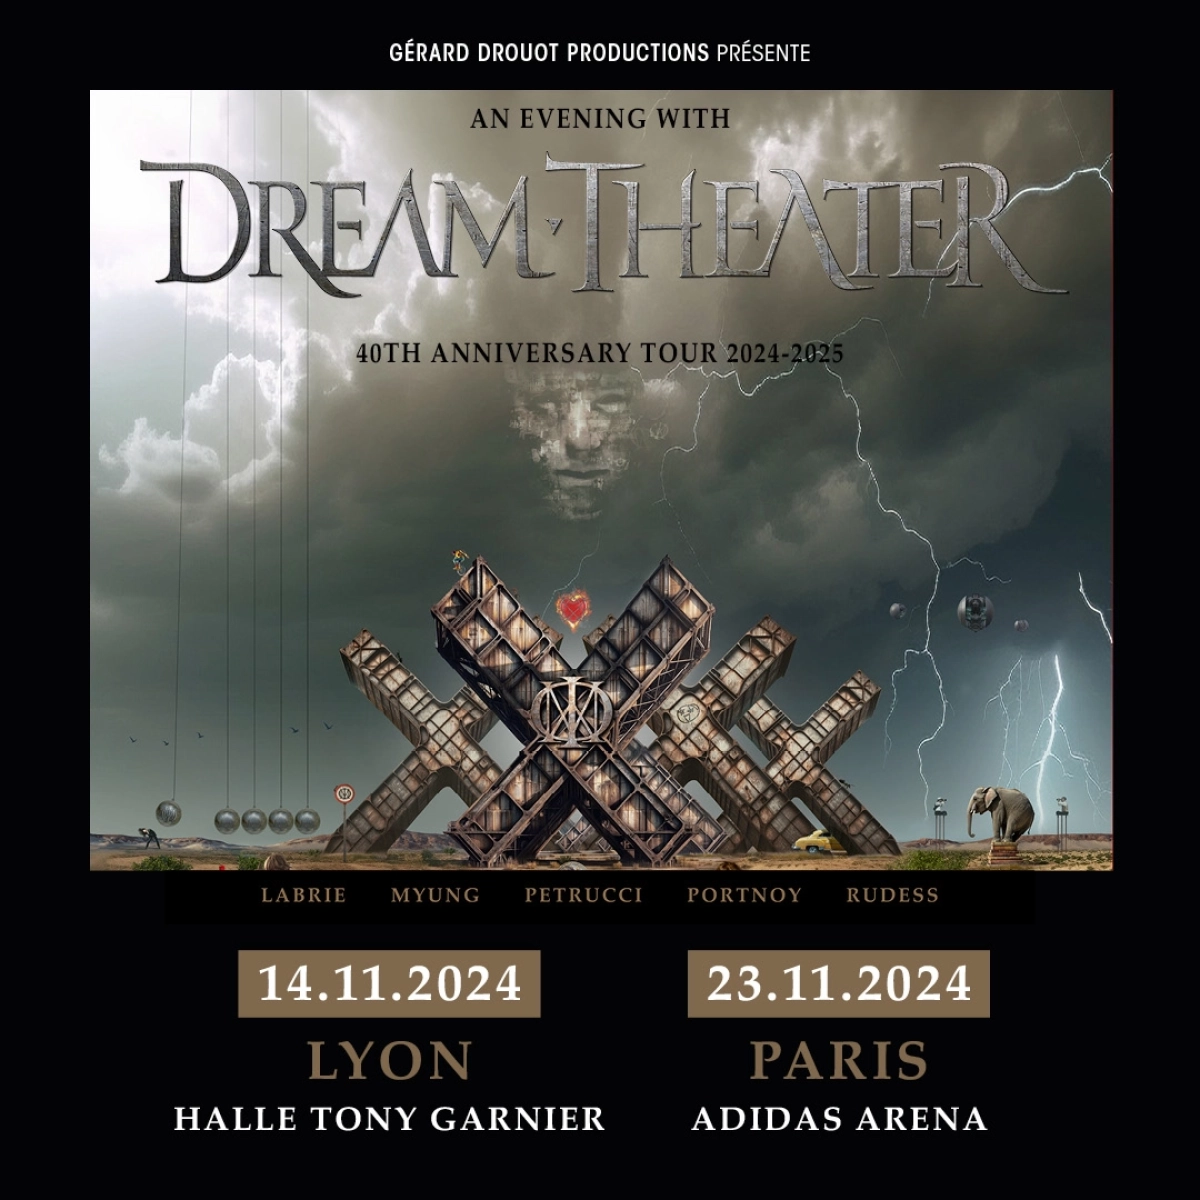 Dream Theater at Adidas Arena Tickets